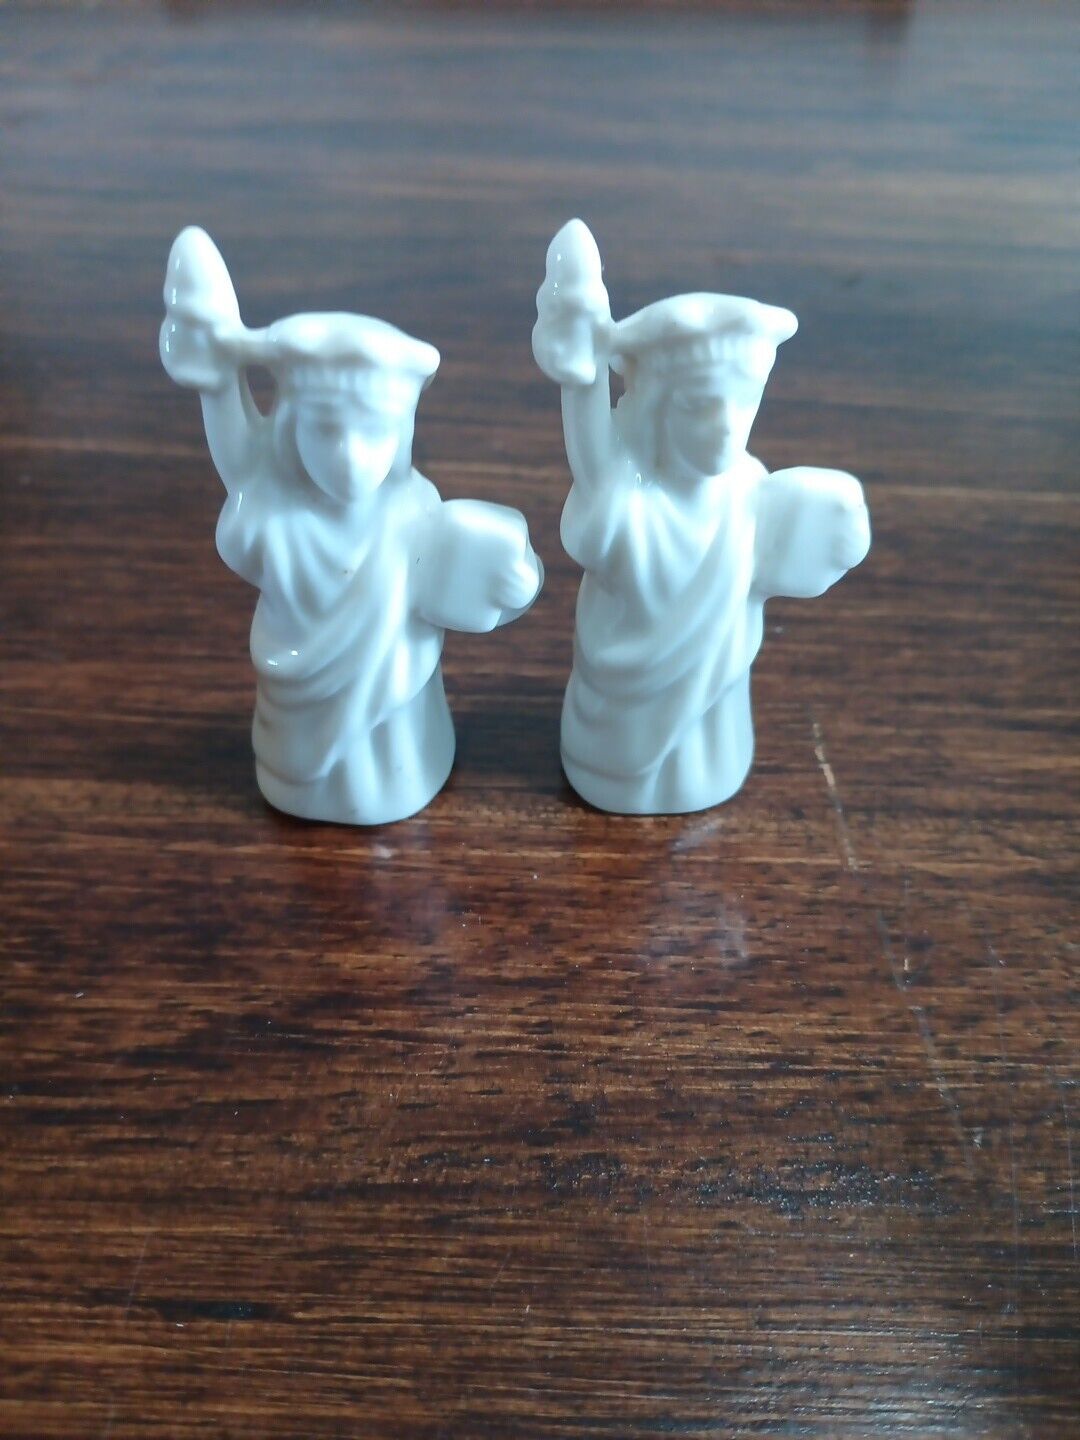 Two Small Statue Of Liberty Figurine Salt And Pepper Shaker Brand New White...